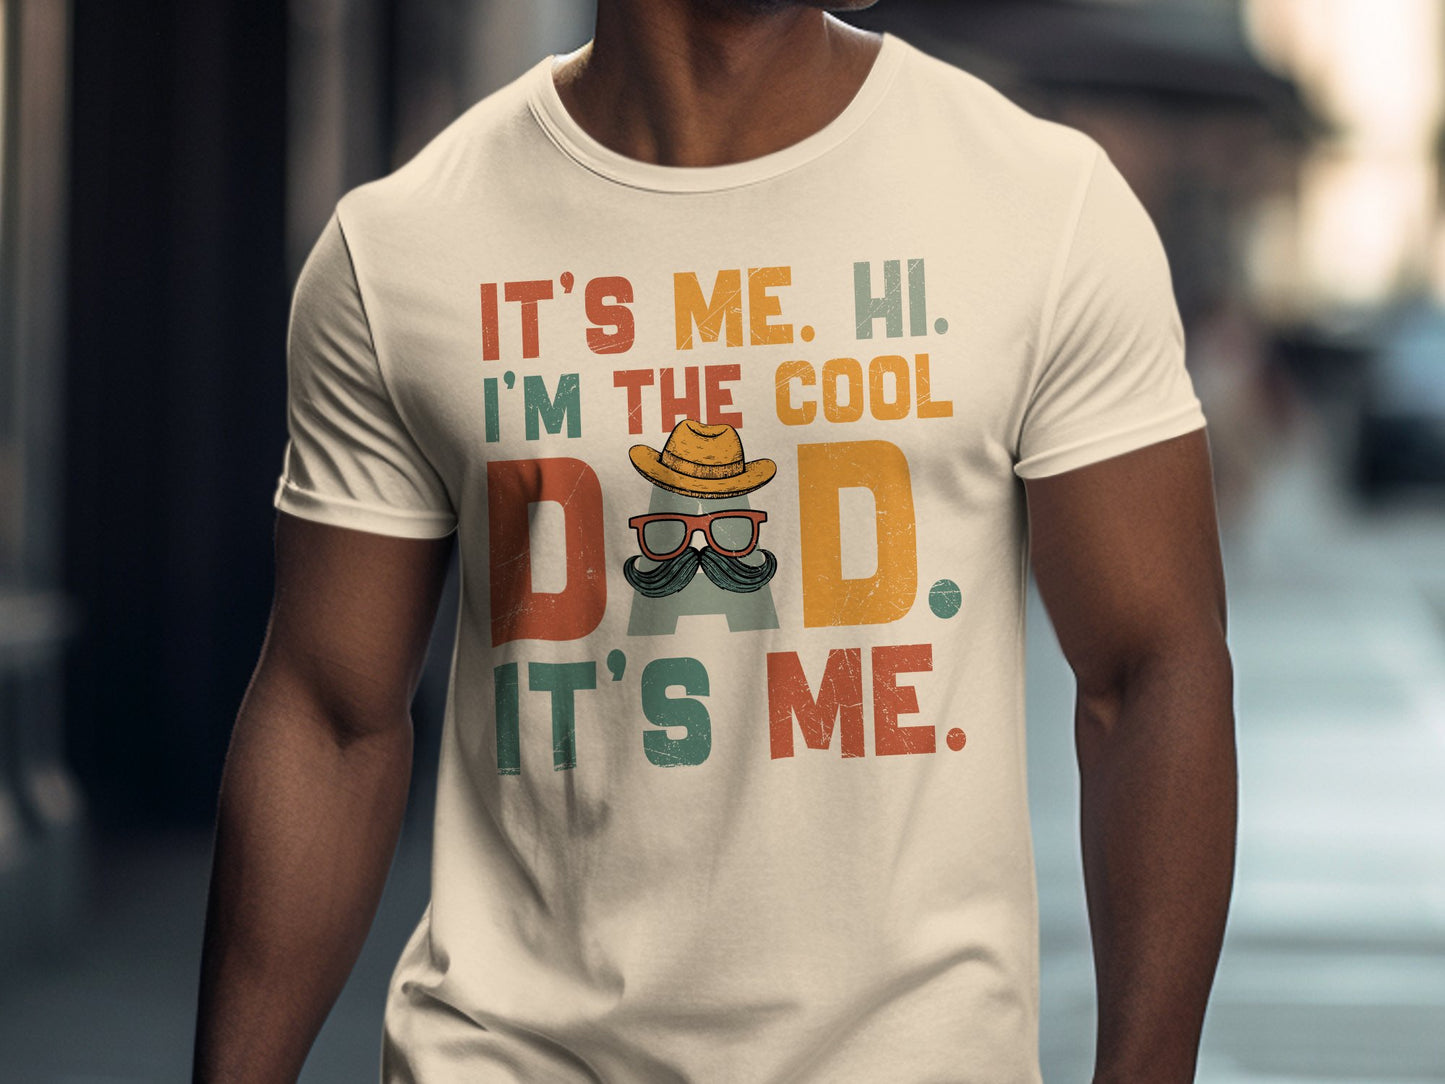 It's me...the cool dad Tshirt